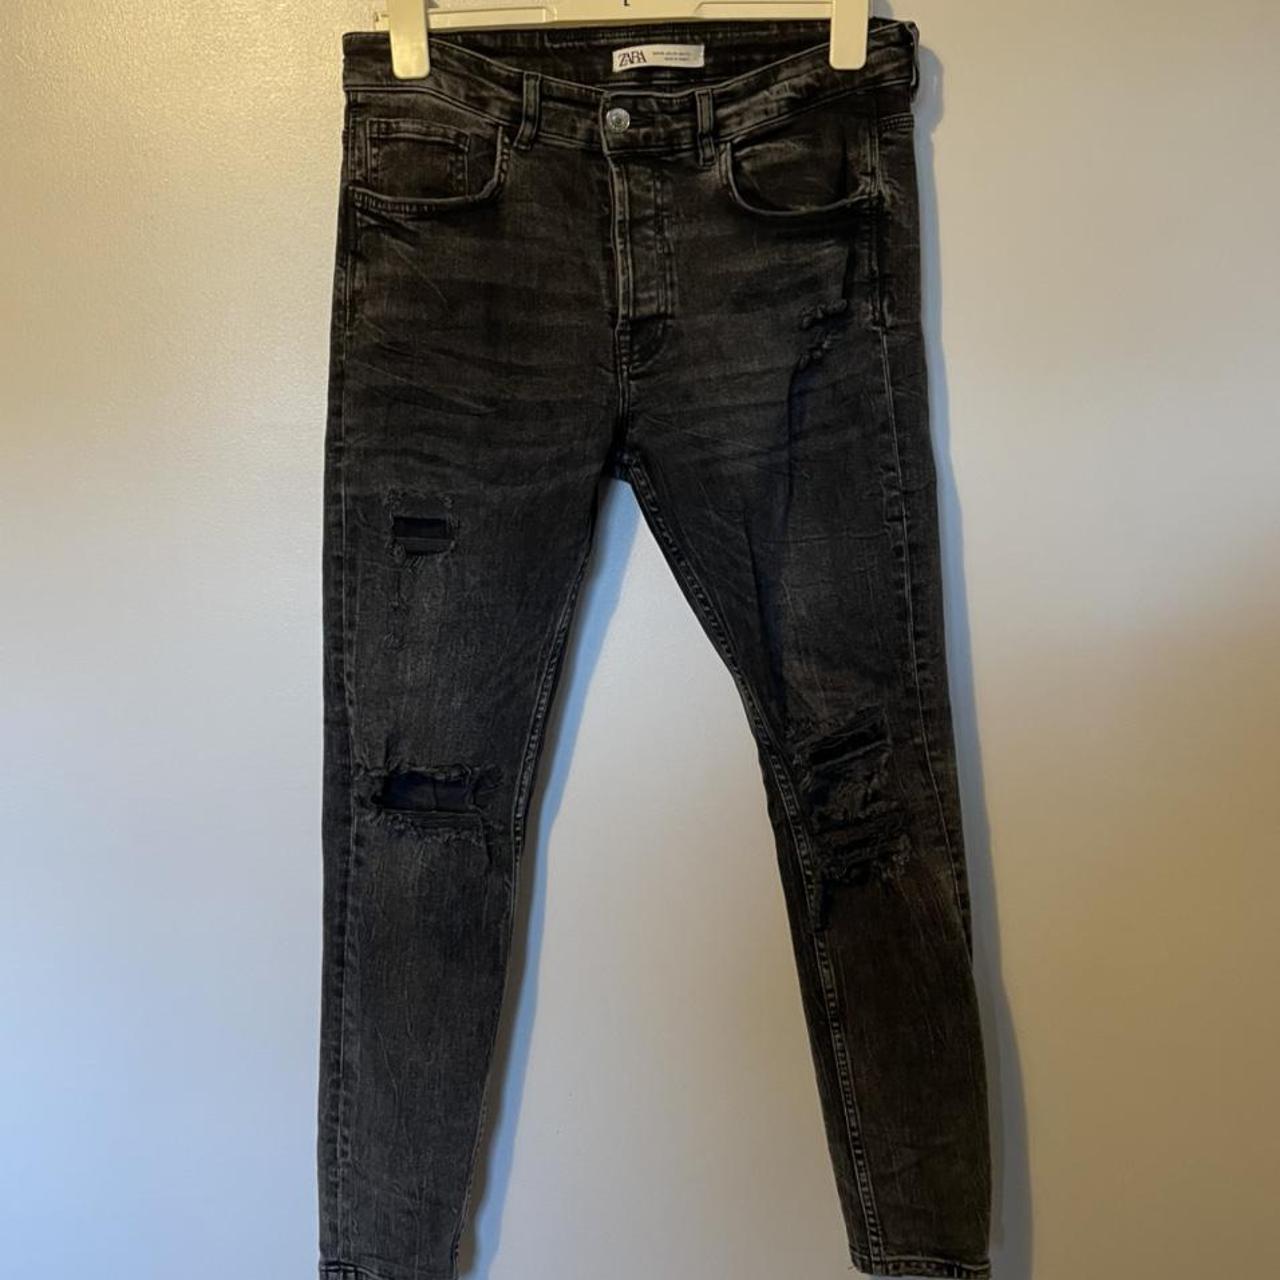 Mens washed black ripped jeans, top condition worn a... - Depop